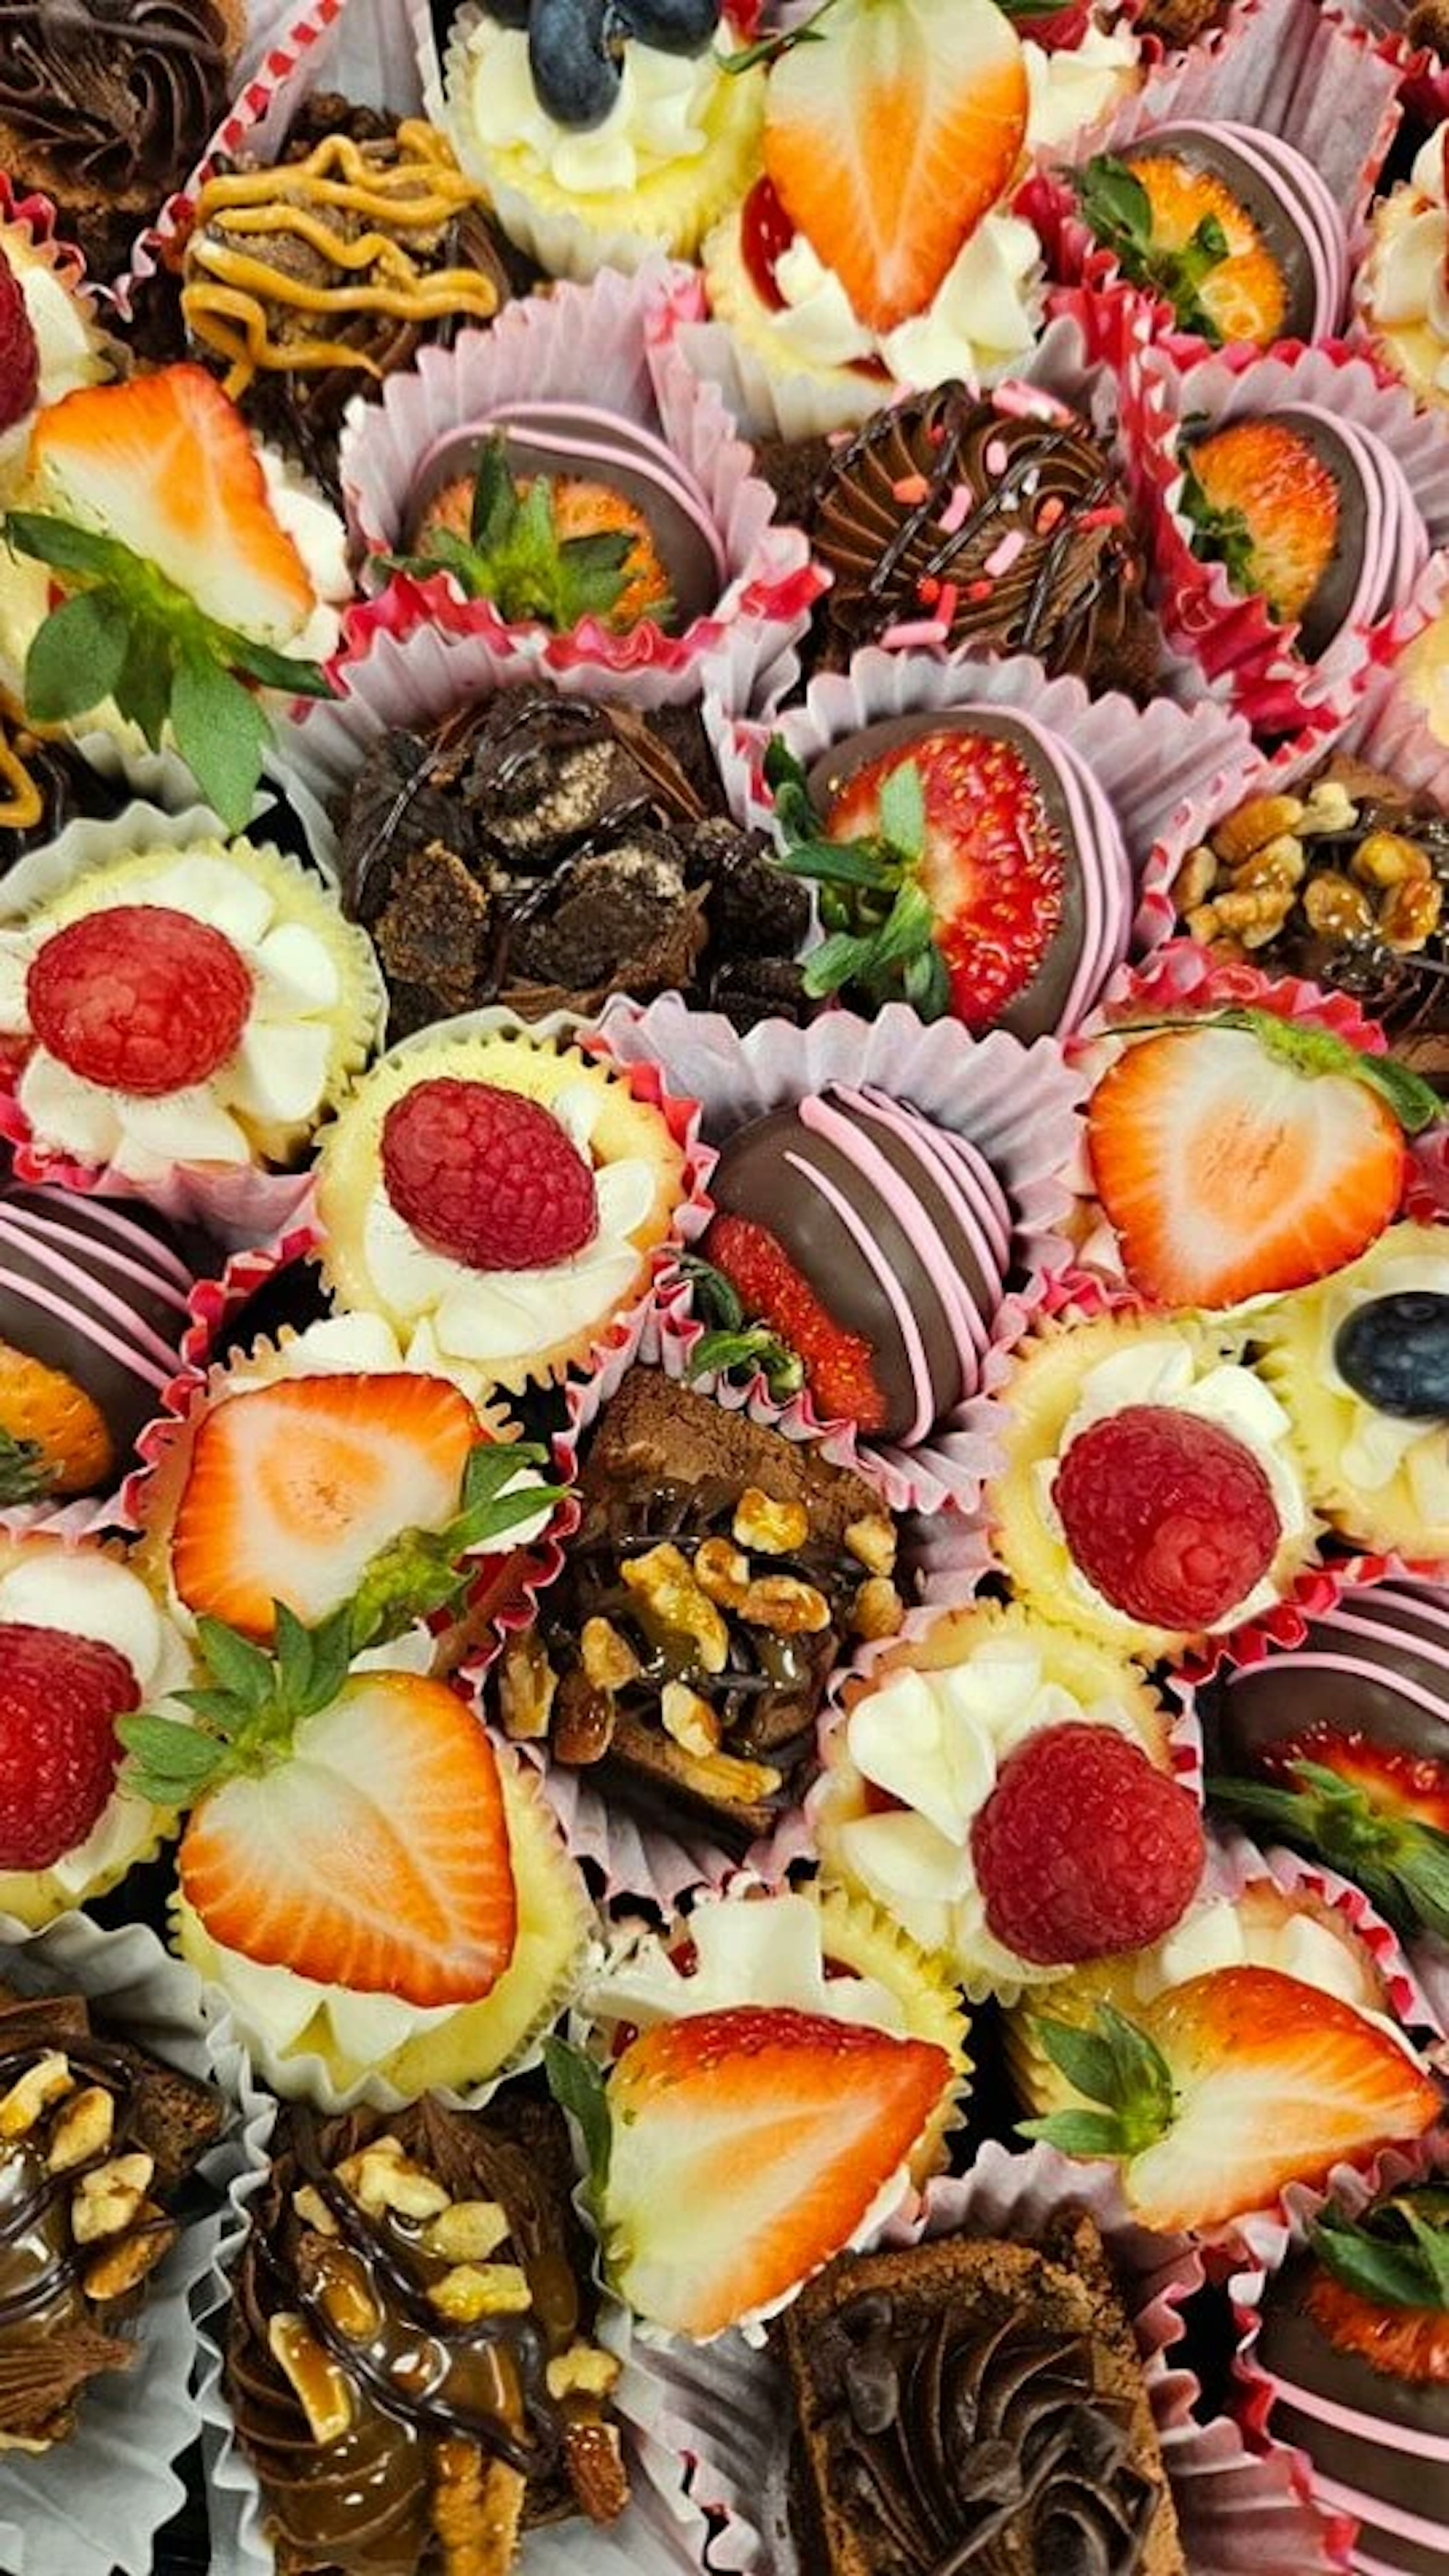 An assortment of chocolate strawberries and other small pastries.